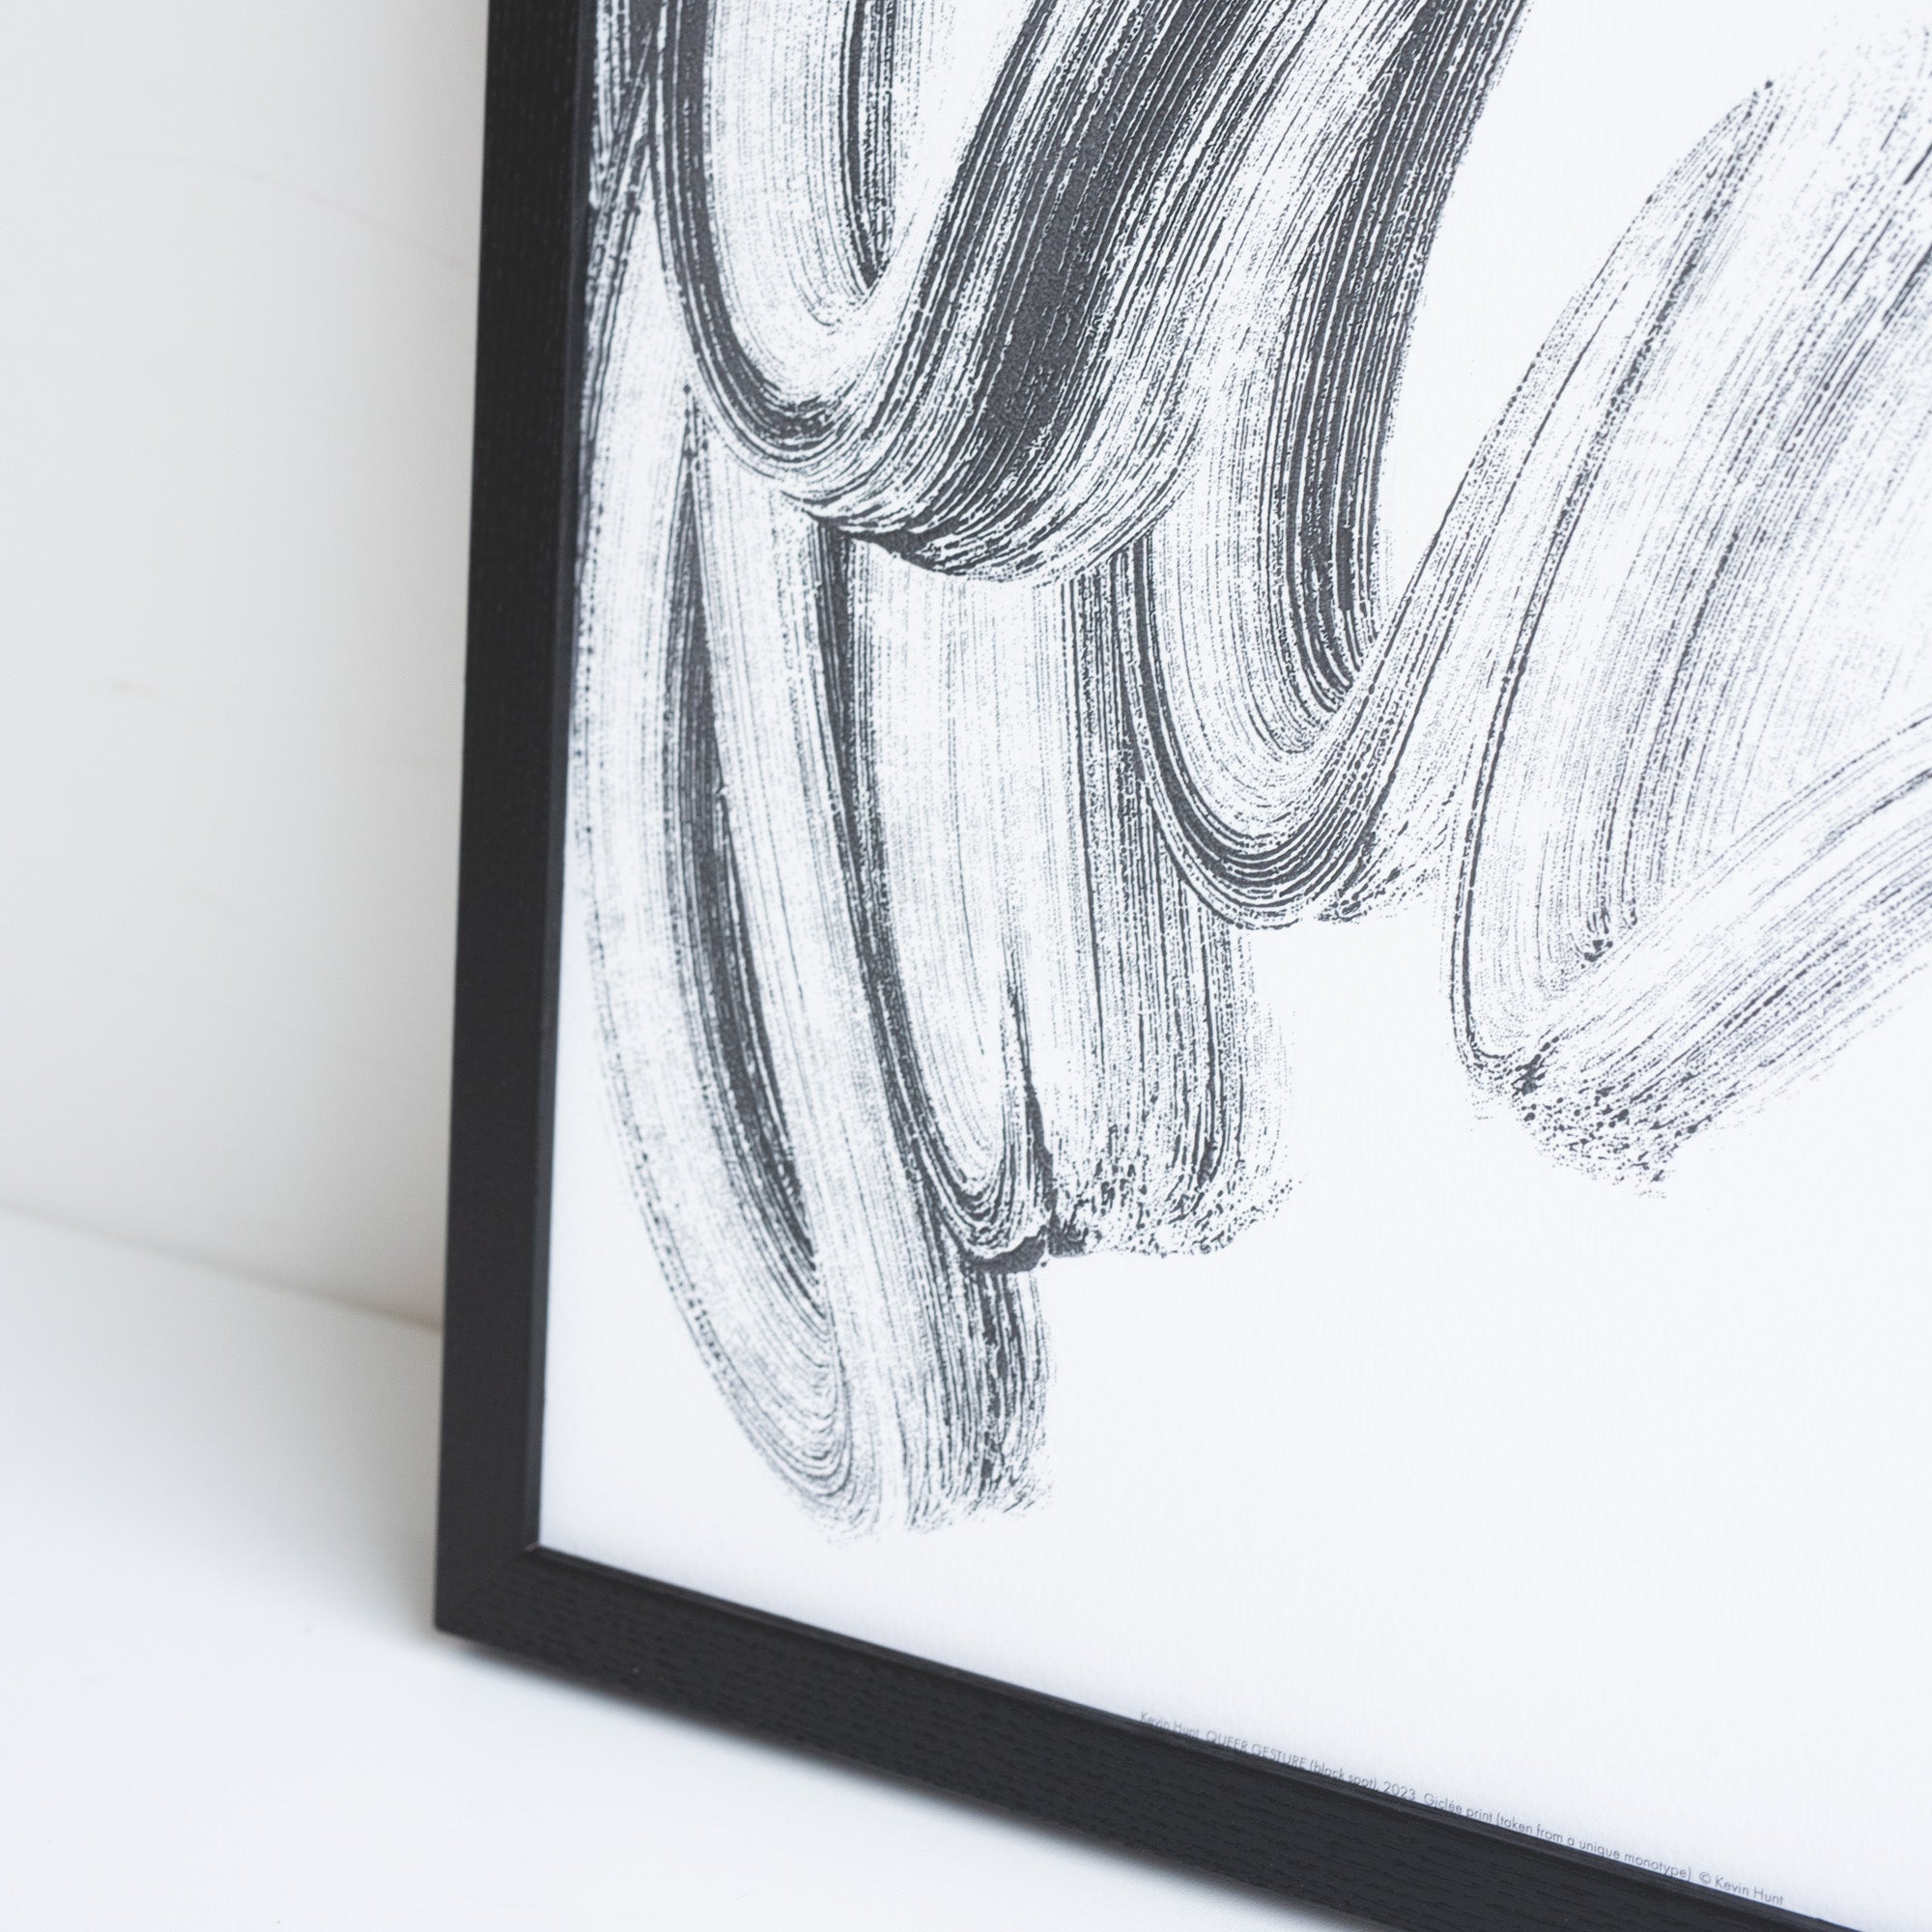 Close up of a printed reproduction of a unique Monotype by Kevin Hunt, placed in a black frame leaning against a white wall.